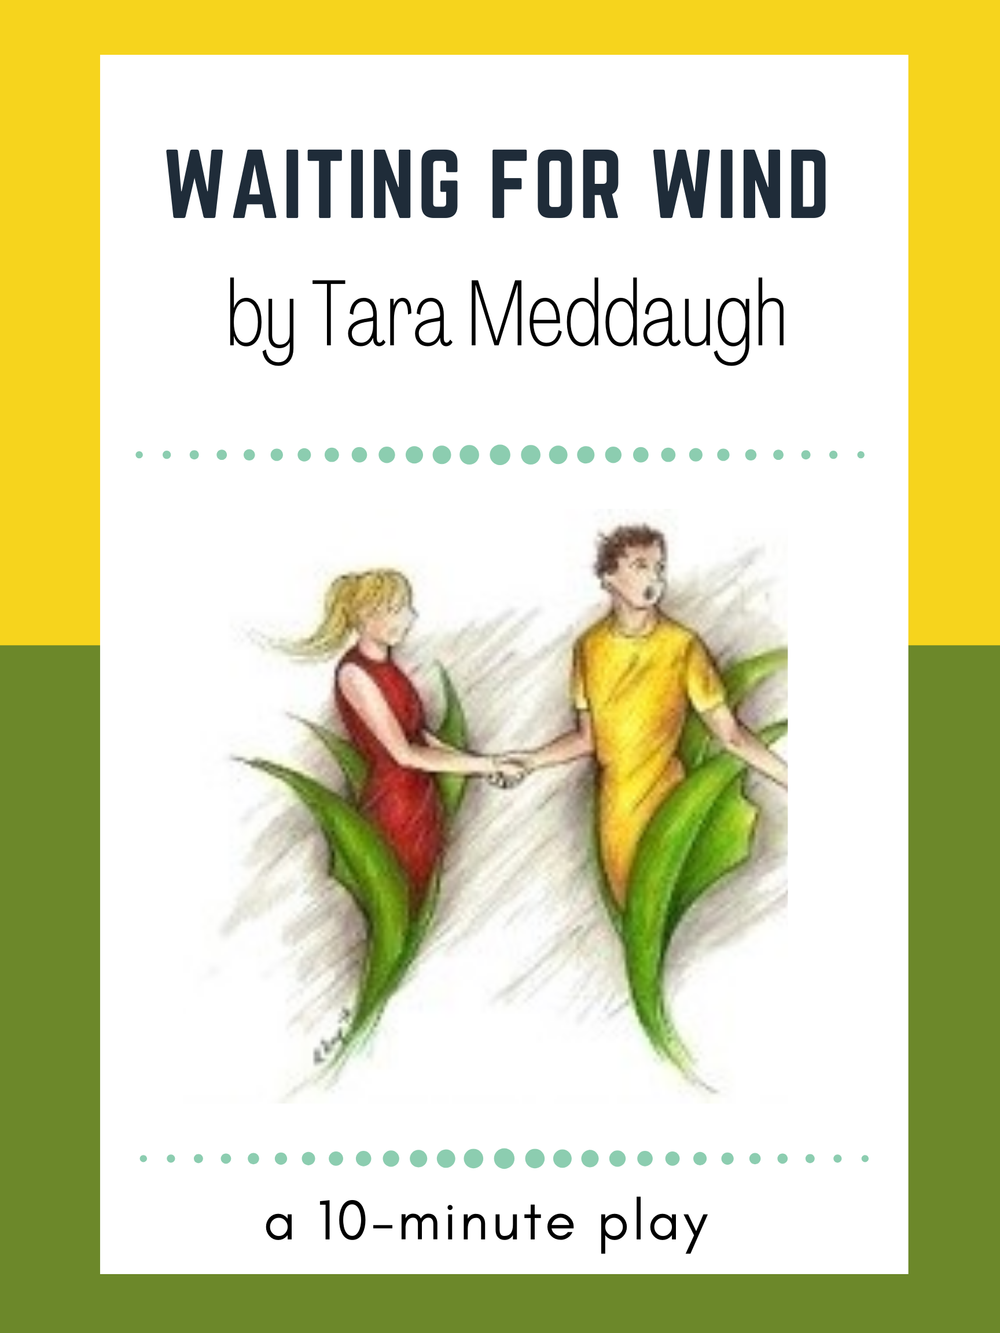 Waiting for wind(1).png